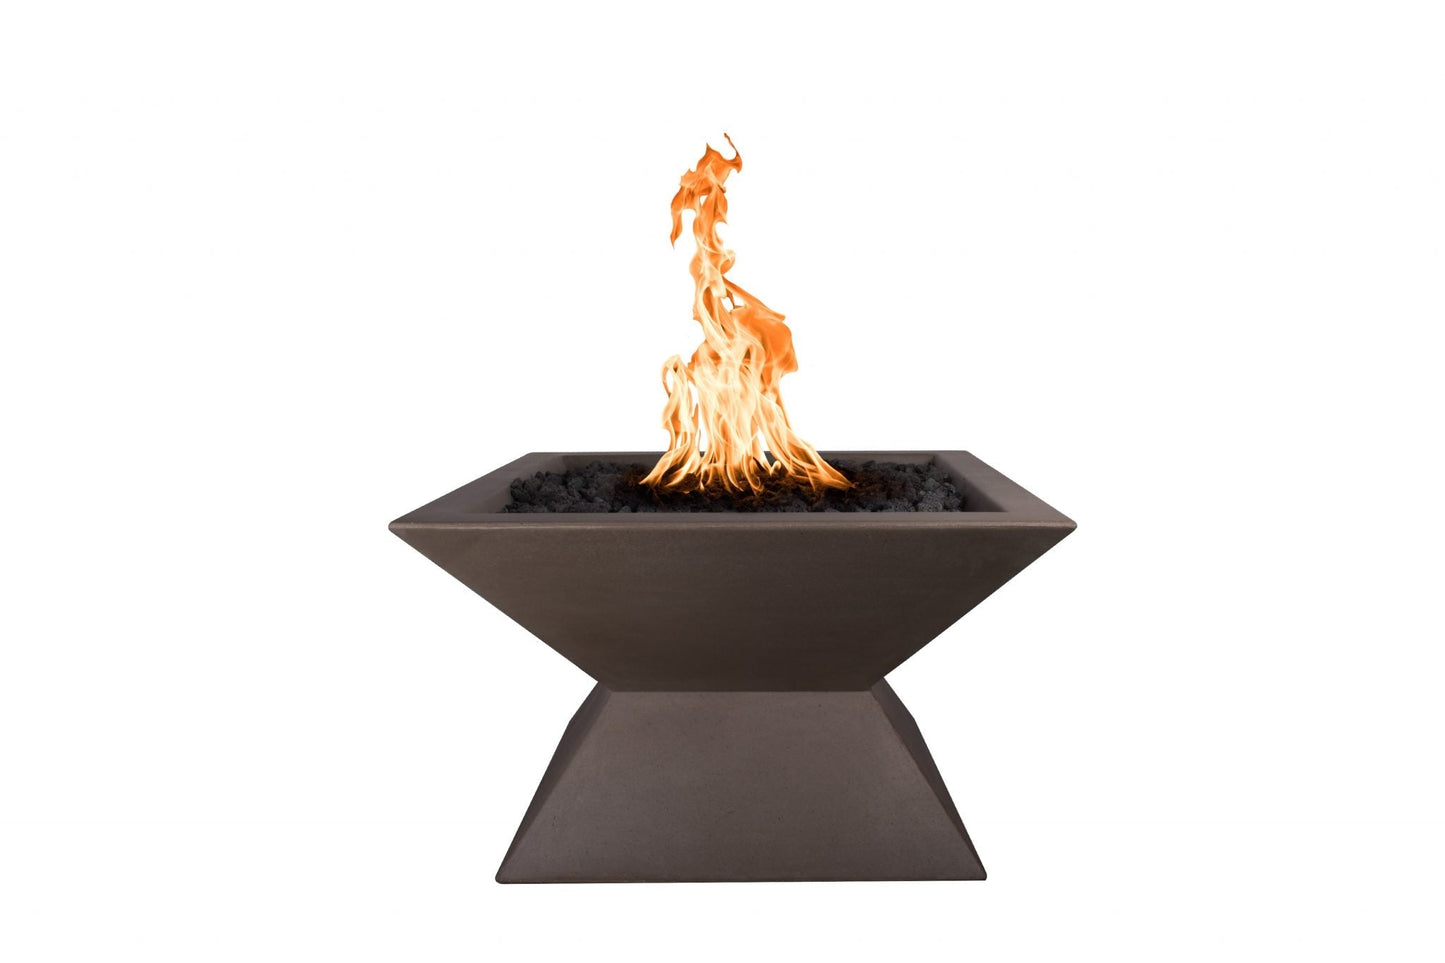 The Outdoor Plus Square Uxmal 30" Rustic White GFRC Concrete Natural Gas Fire Pit with Match Lit with Flame Sense Ignition